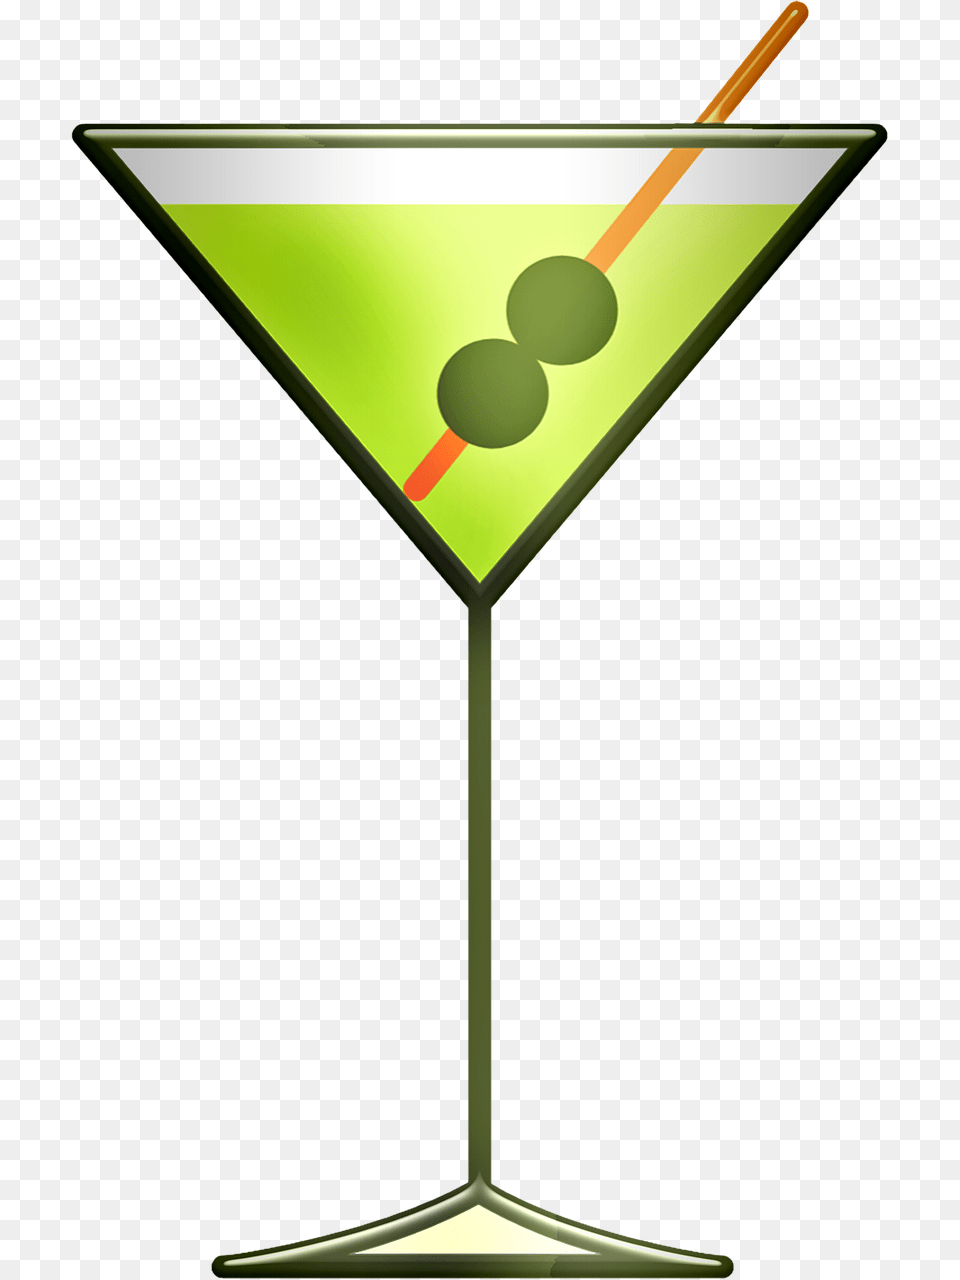 Martini Drink Alcohol Cocktail Alcoholic Party Martini Drink Clip Art, Beverage Png